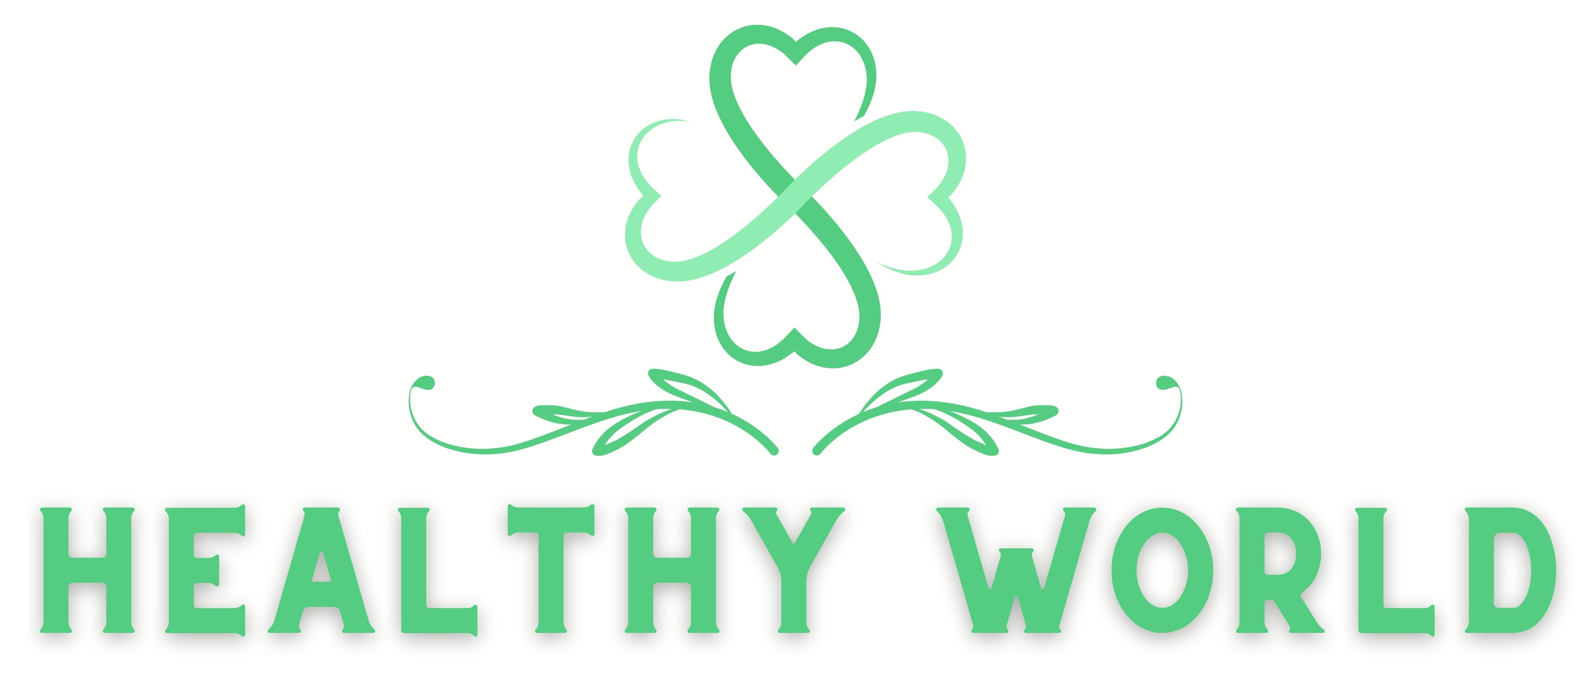 The Healthy World for Healthy Living